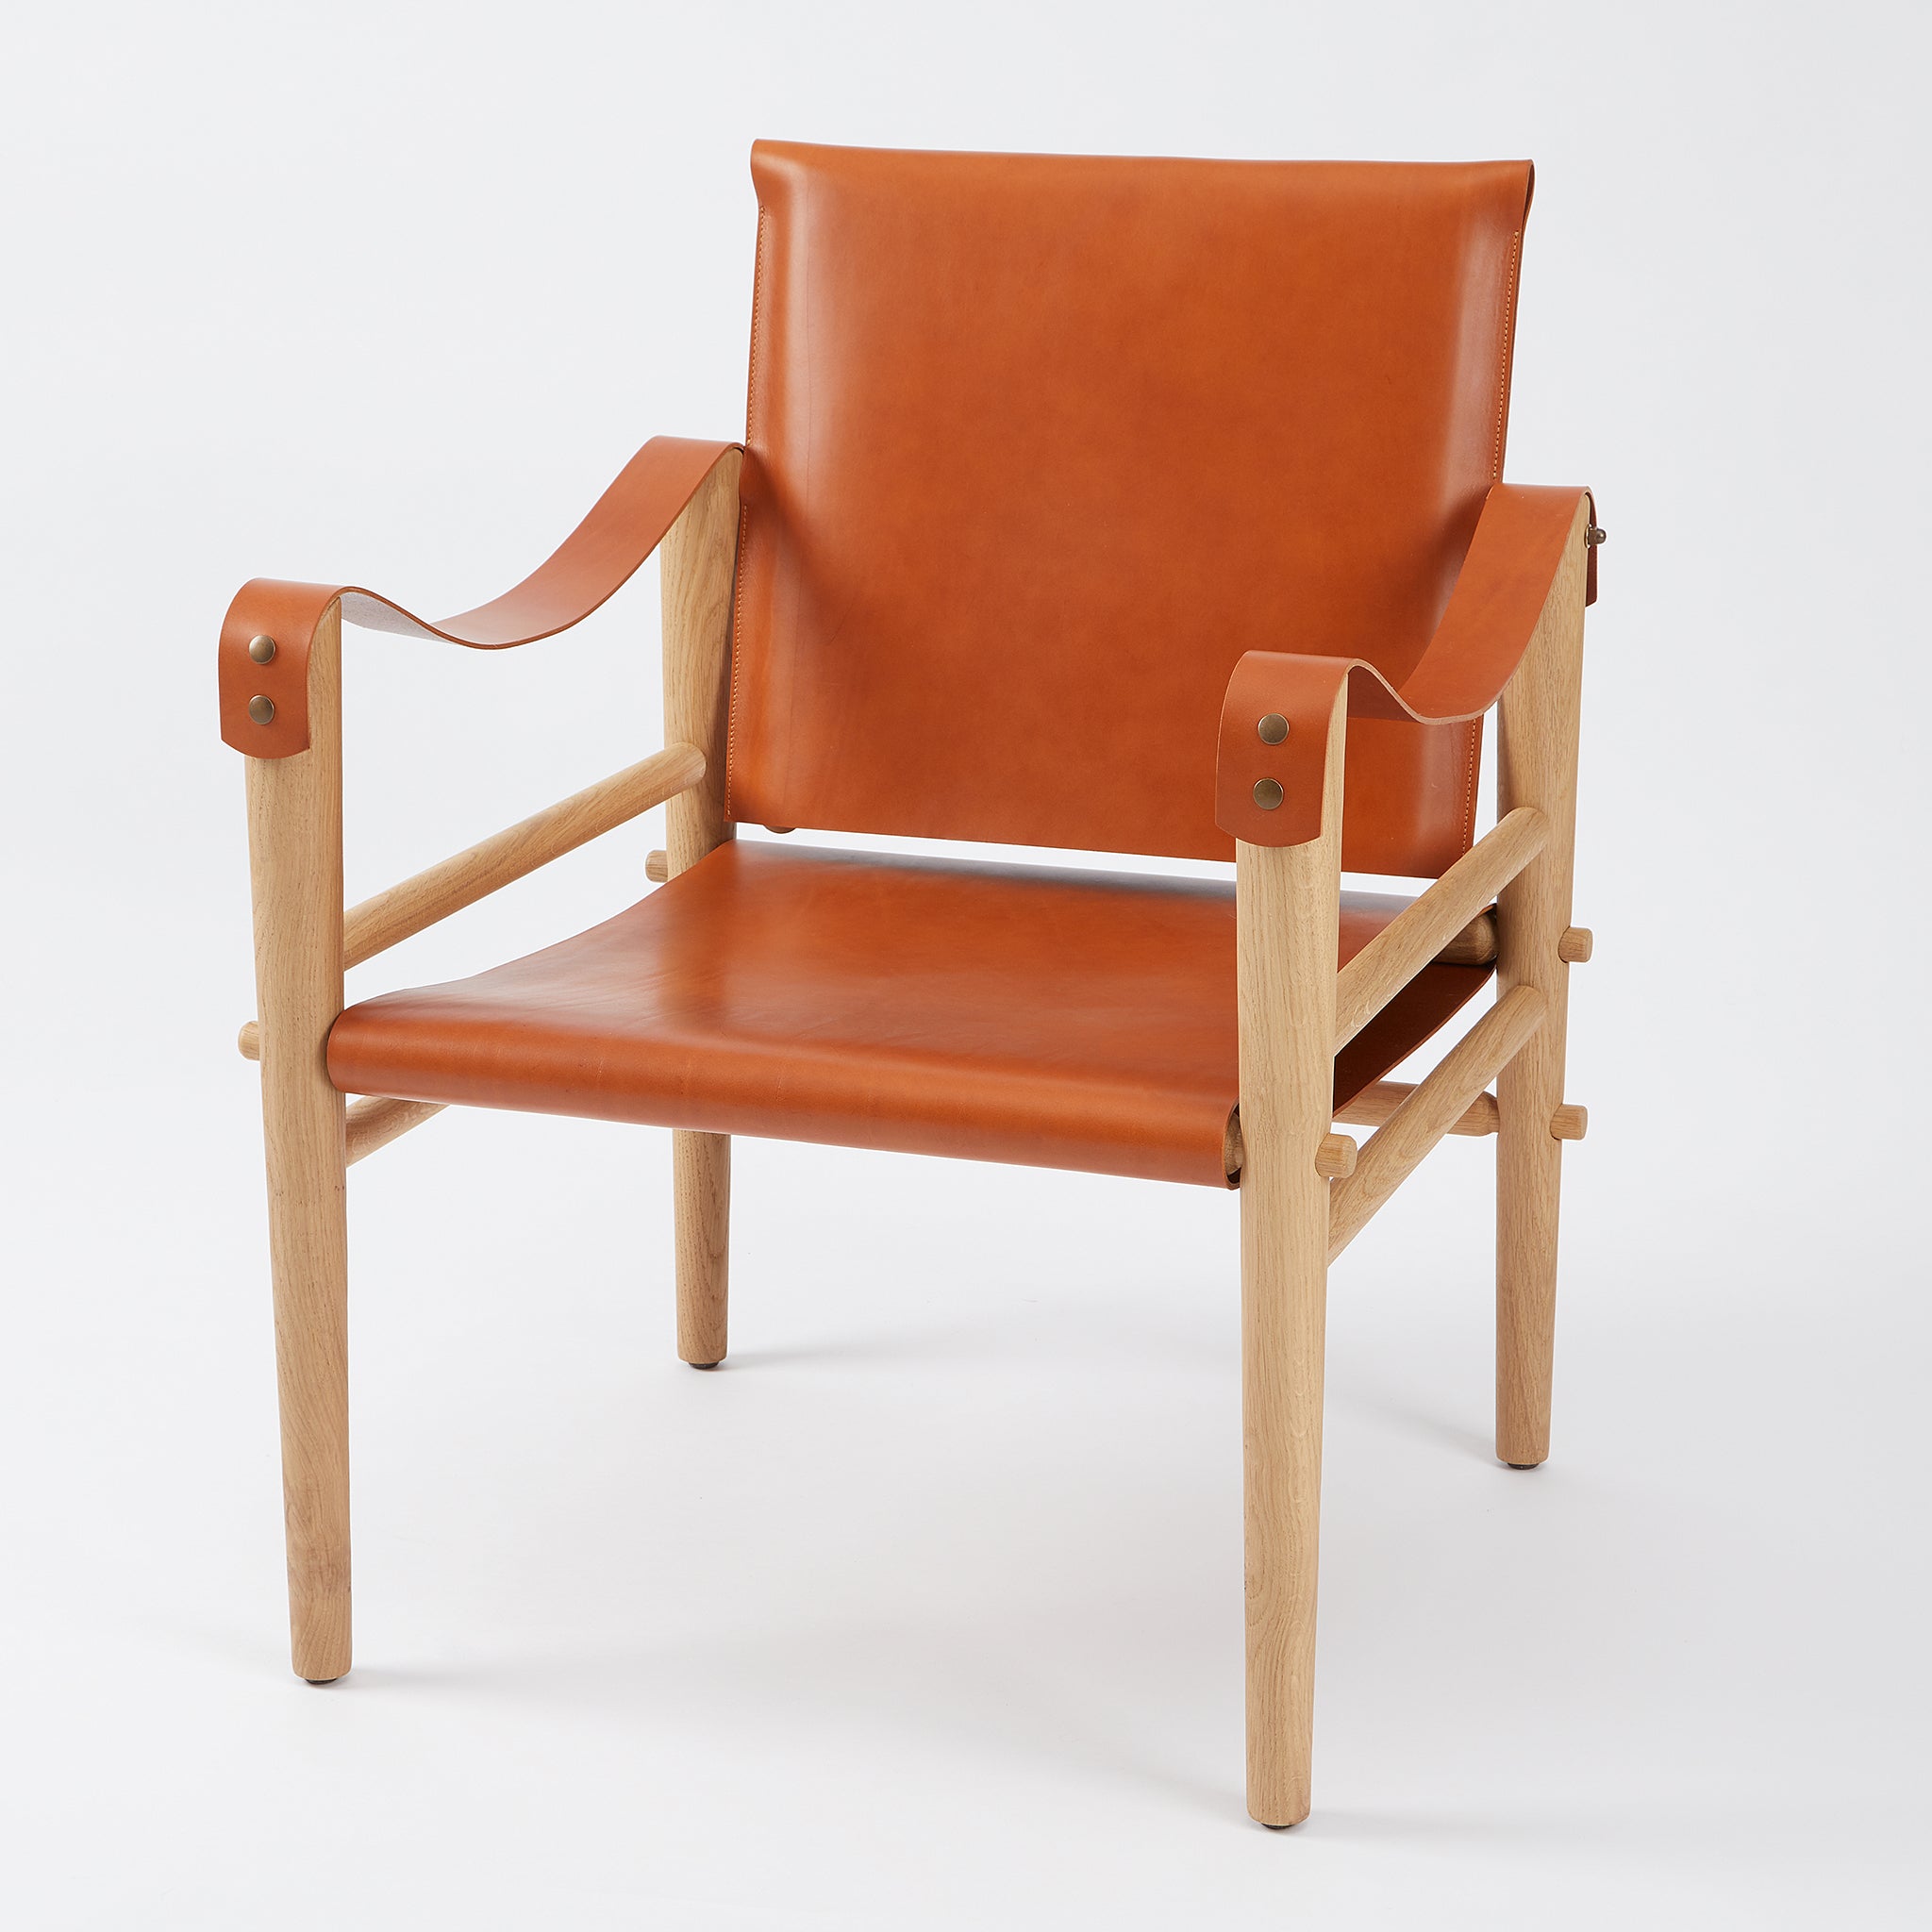 Safari Chair in leather and oak - By Native